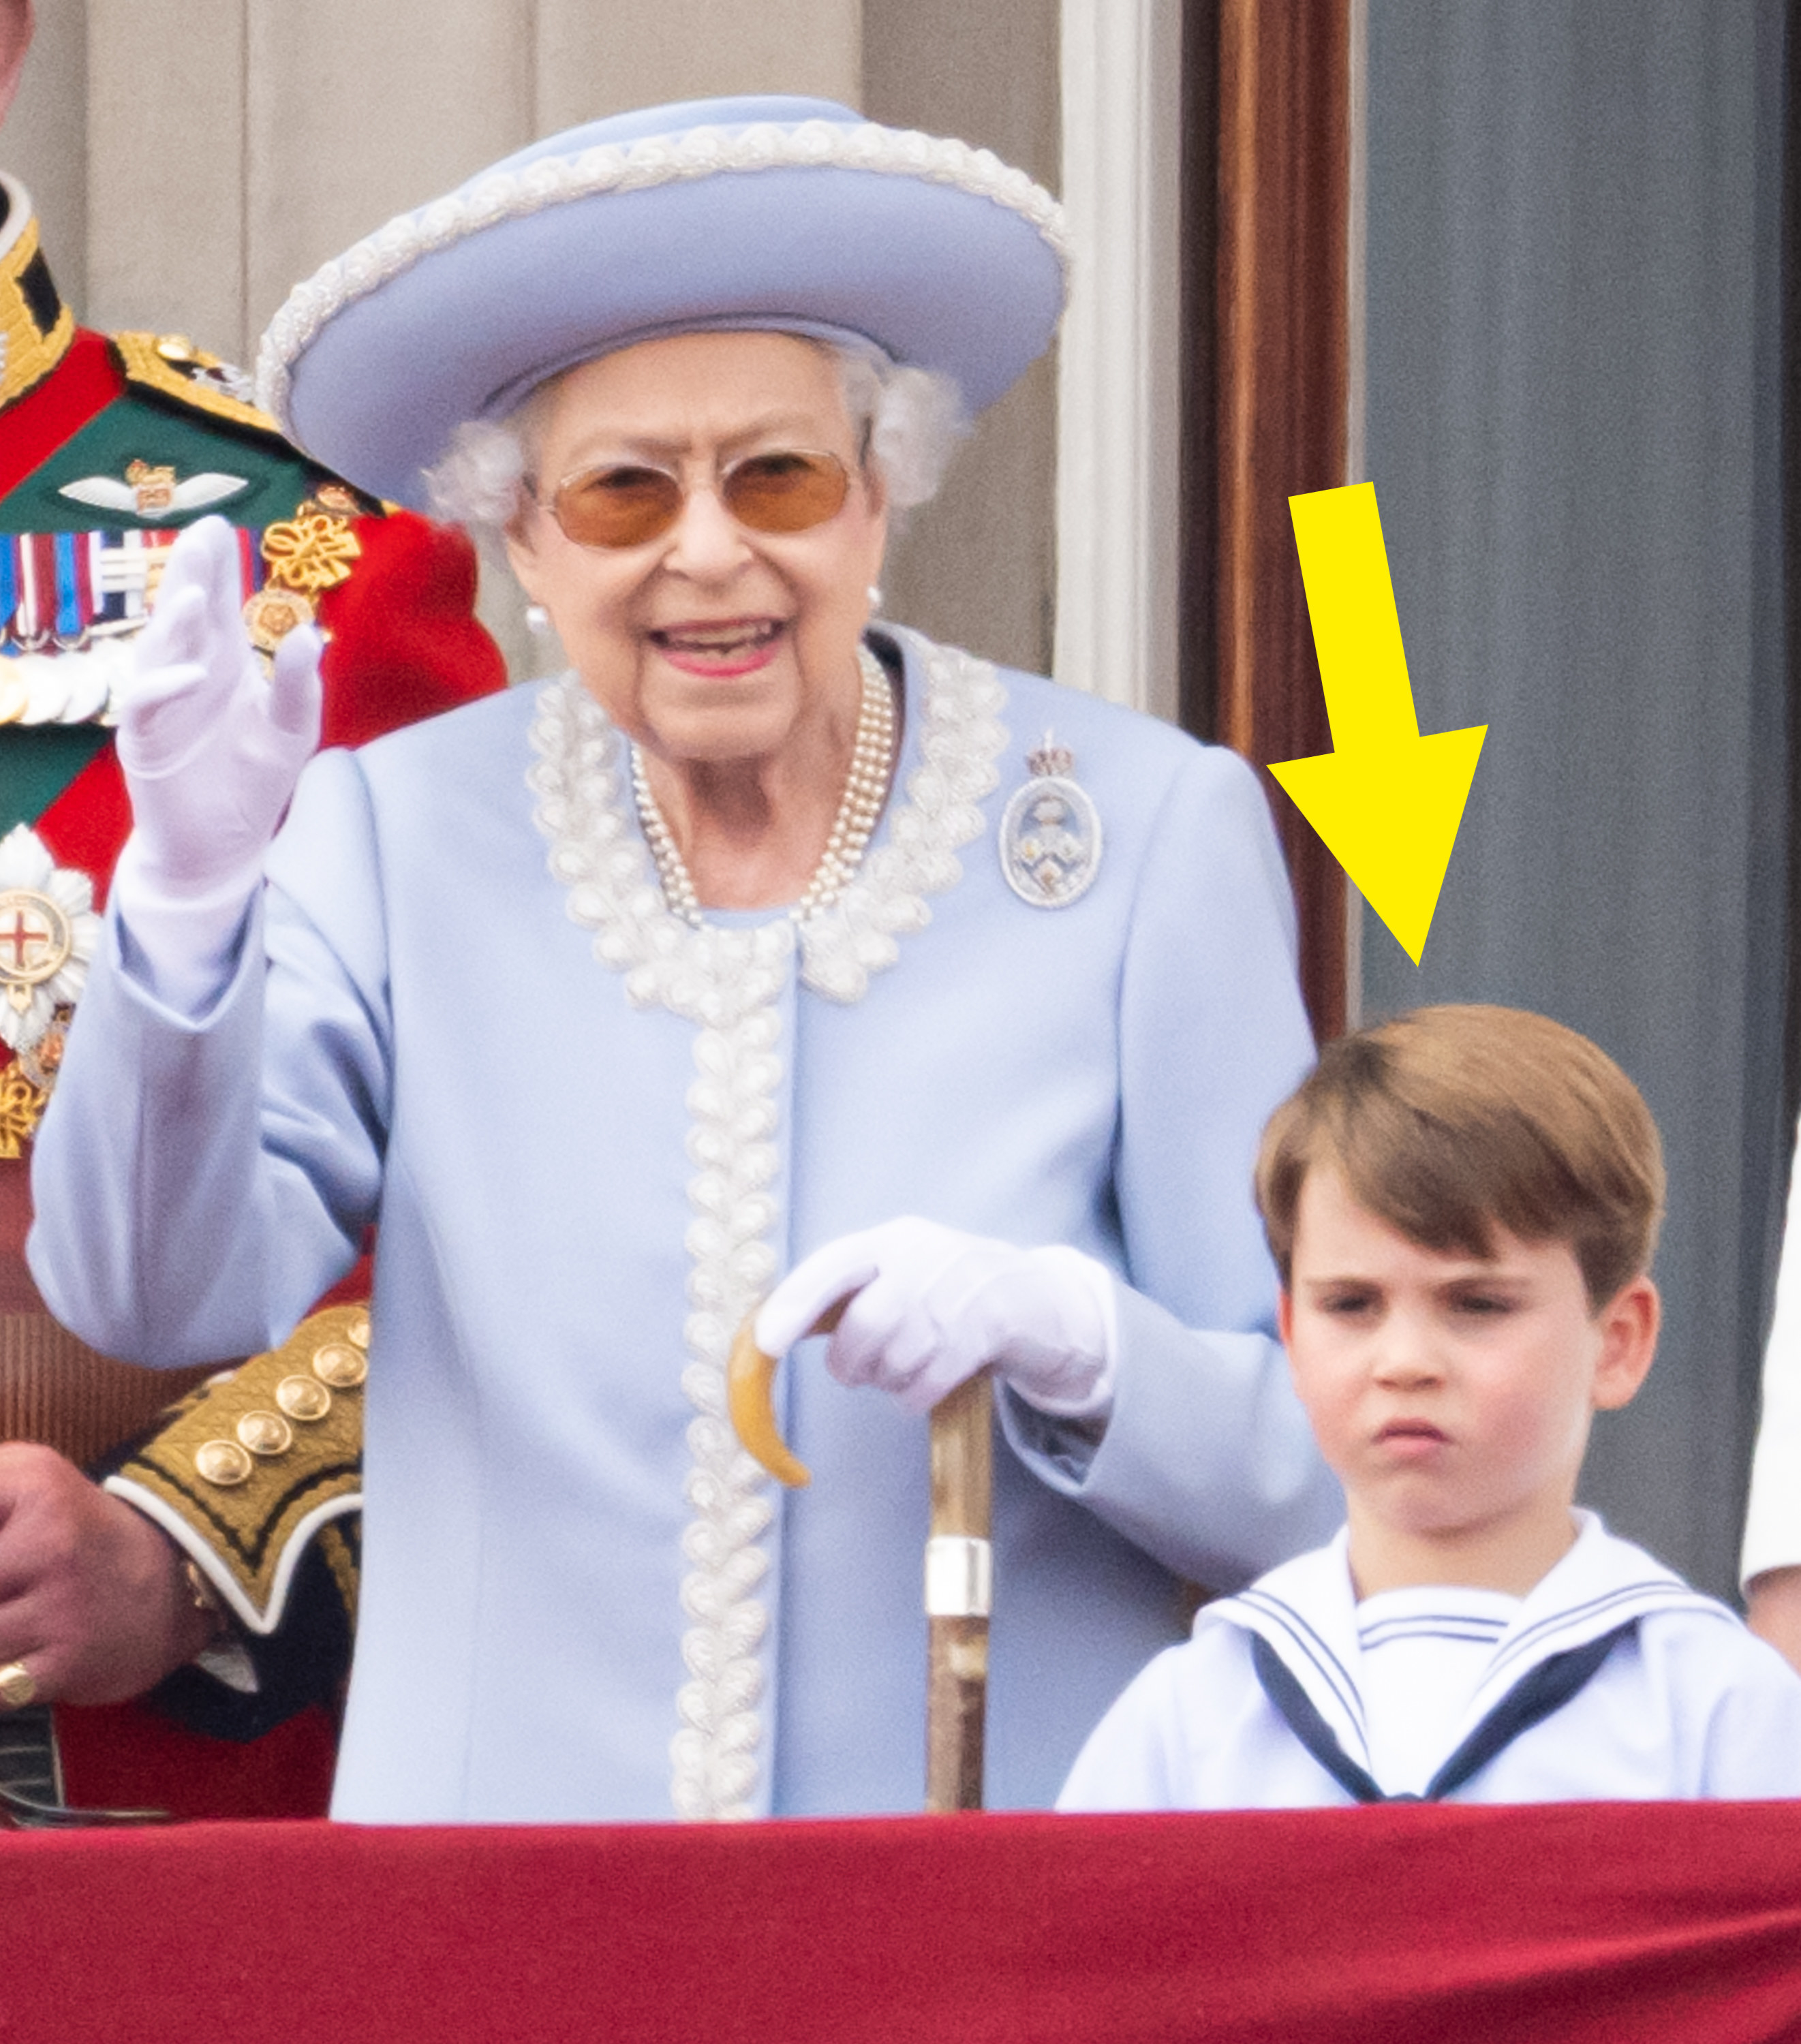 An arrow points to Prince Louis, who looks bored and annoyed standing next to Queen Elizabeth